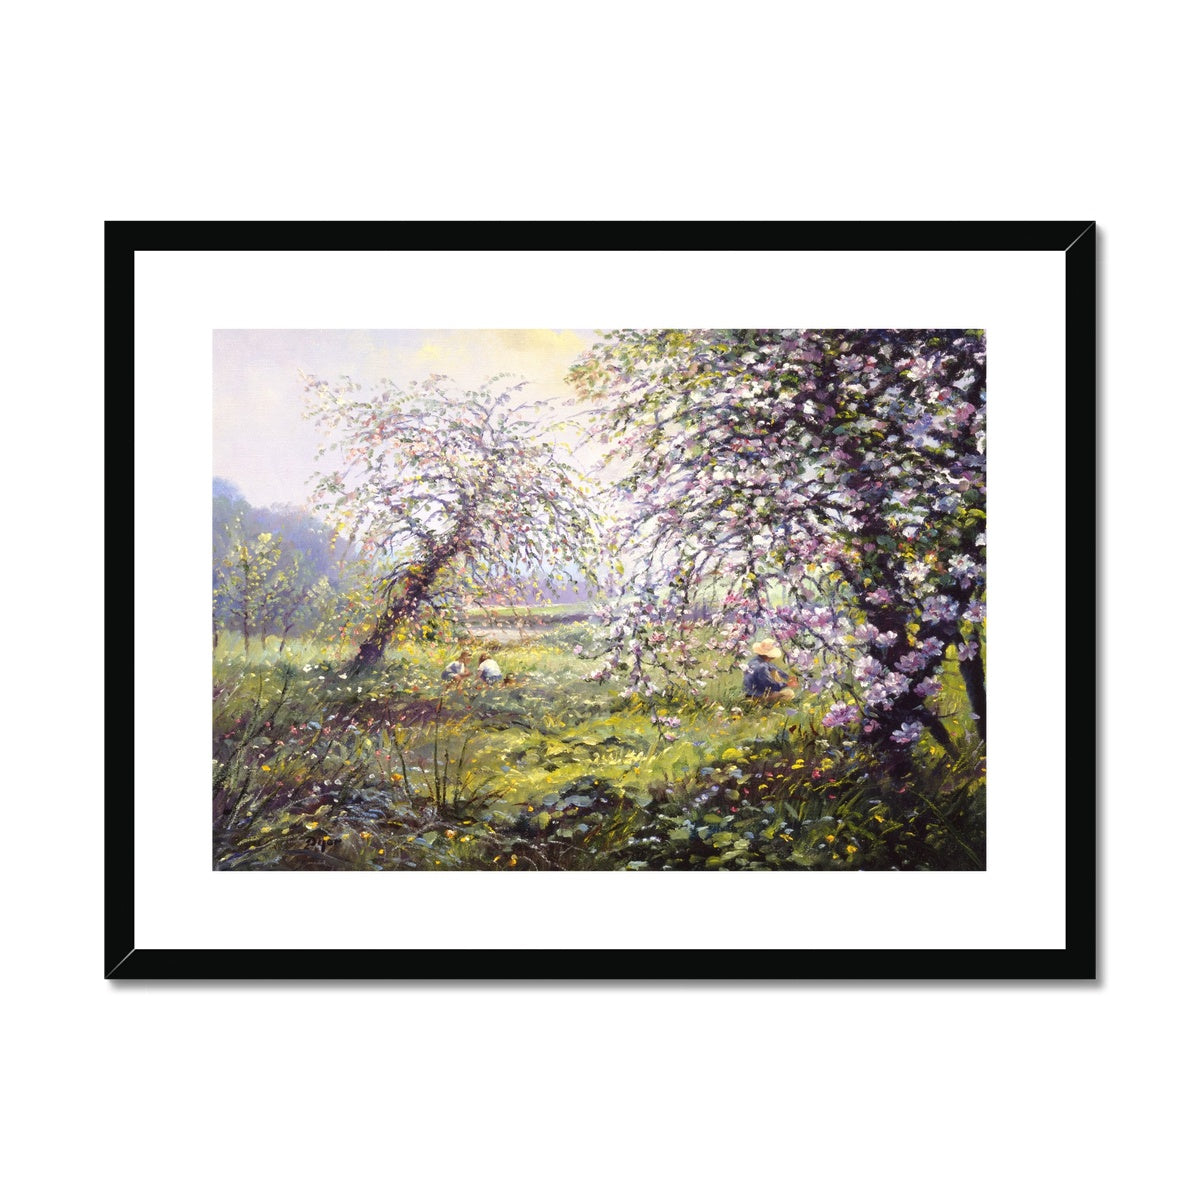 Ted Dyer Framed Open Edition Cornish Fine Art Print. 'Playing in the Apple Orchard'. Cornwall Art Gallery